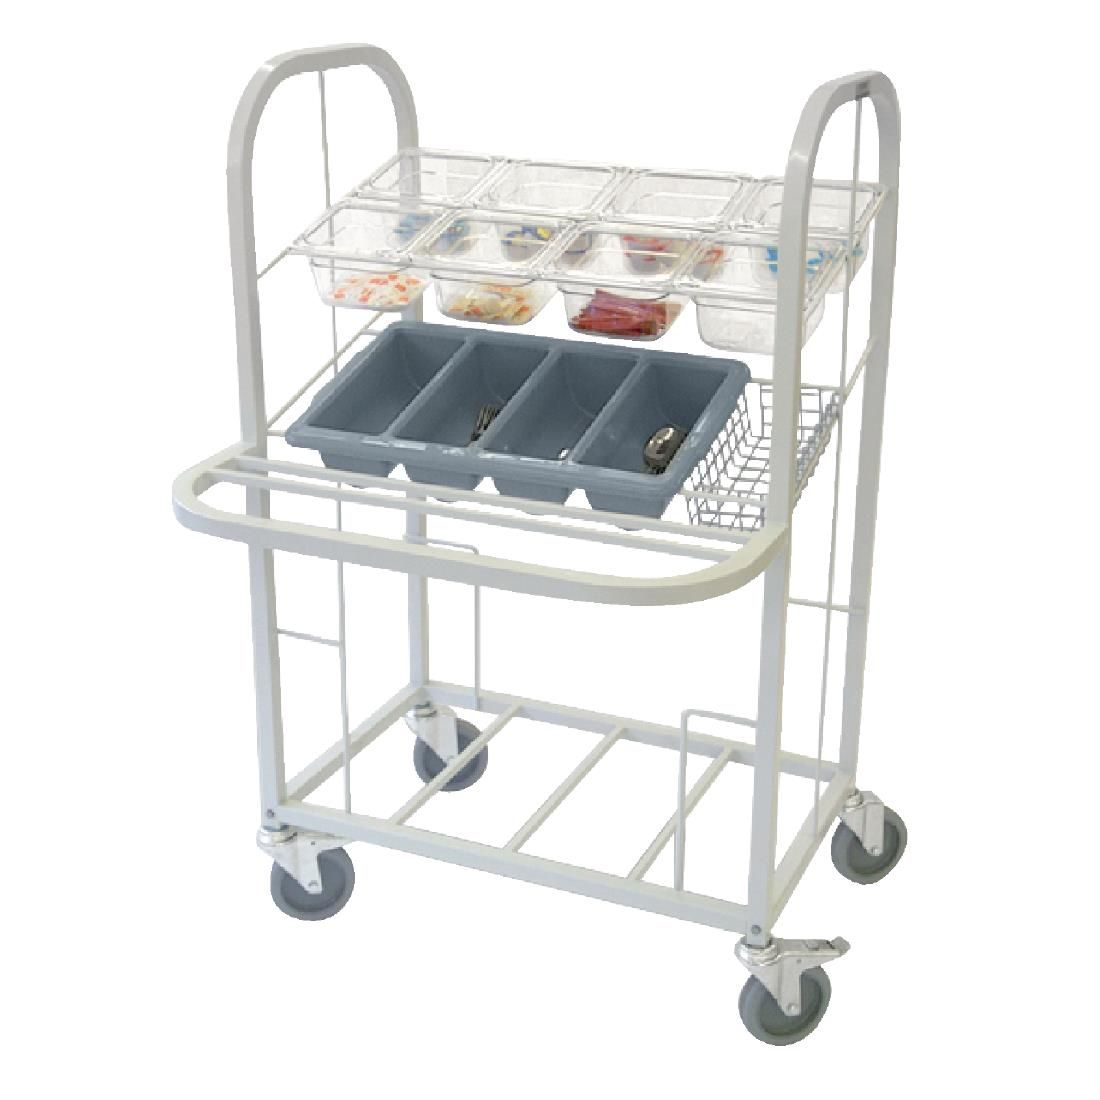 Craven Steel Condiment, Cutlery and Tray Dispense Trolley JD Catering Equipment Solutions Ltd